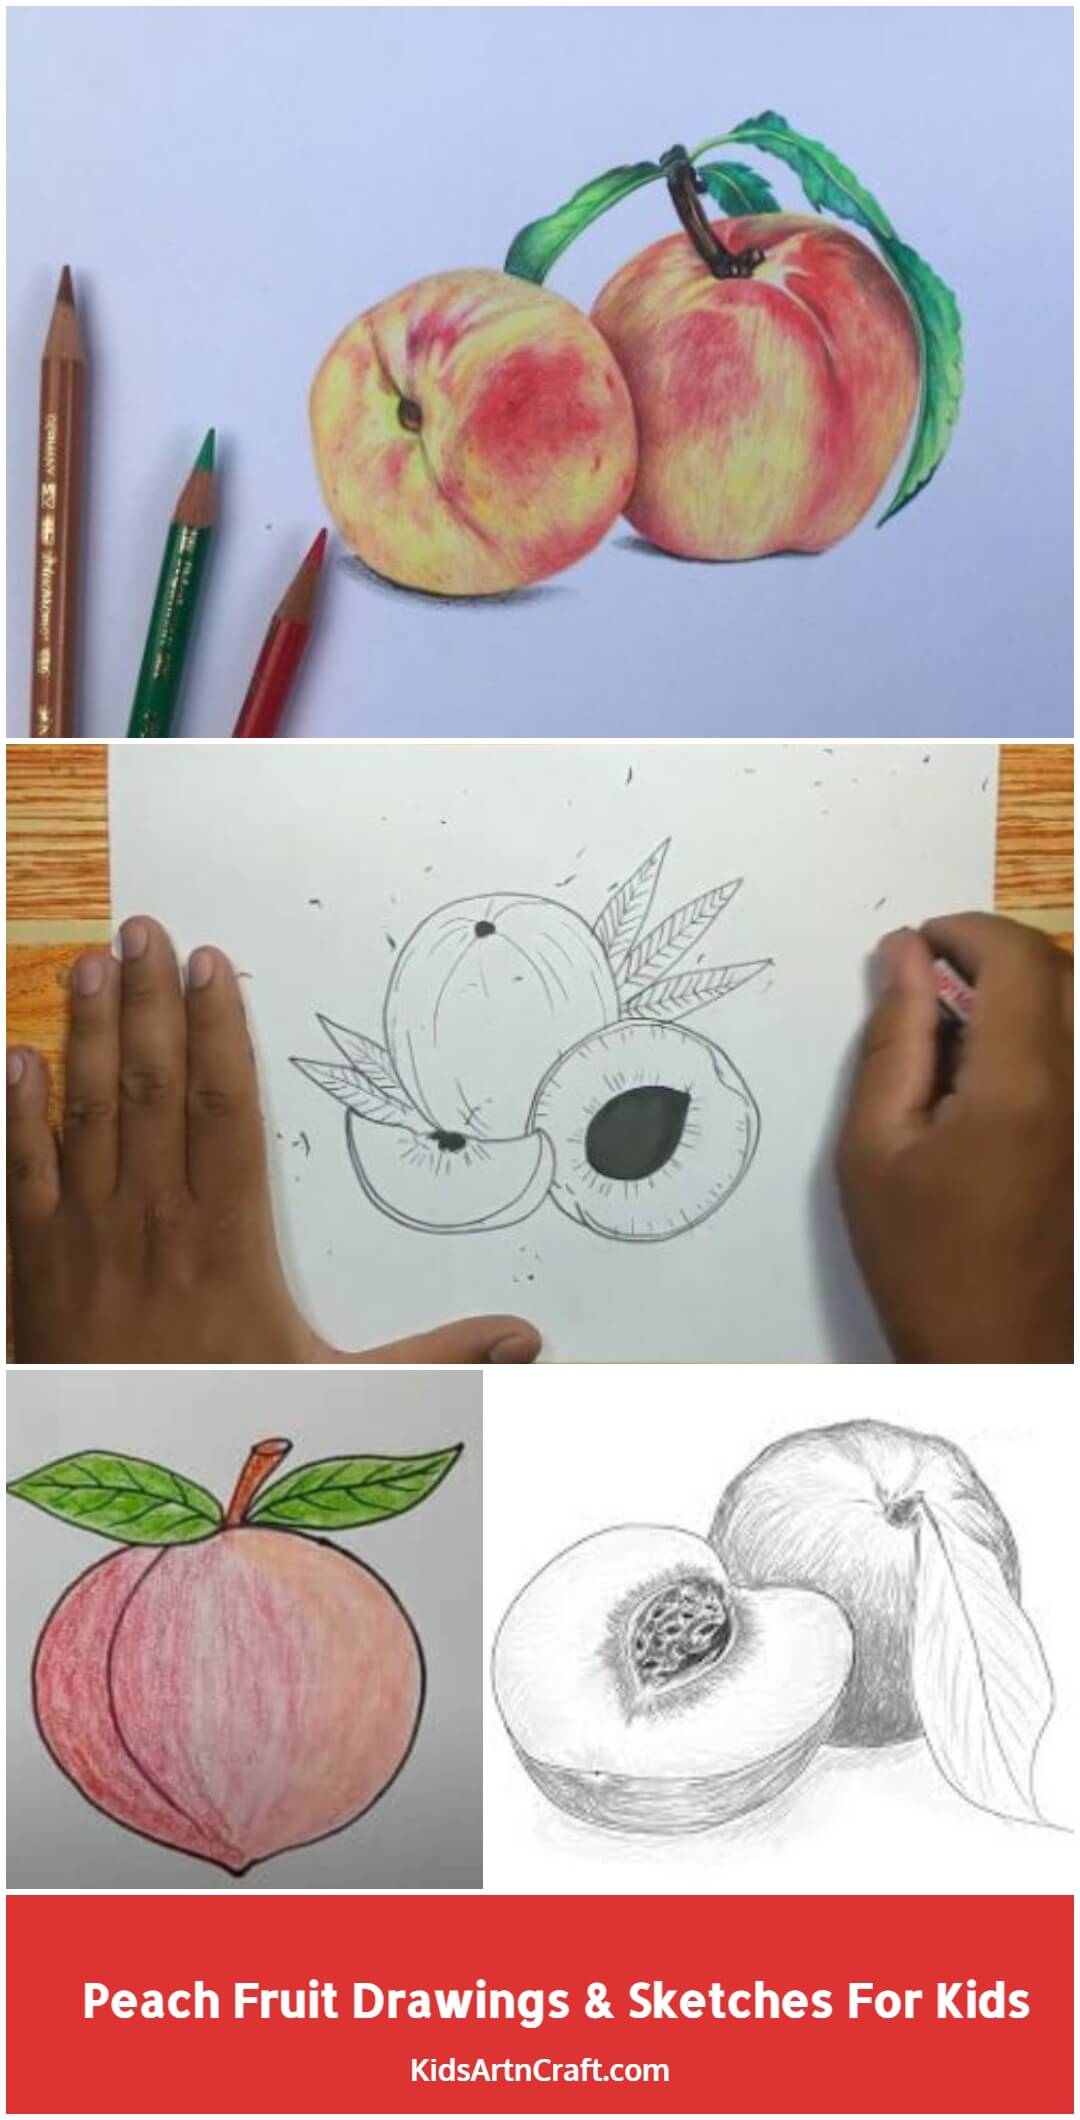 Peach Fruit Drawings & Sketches For Kids